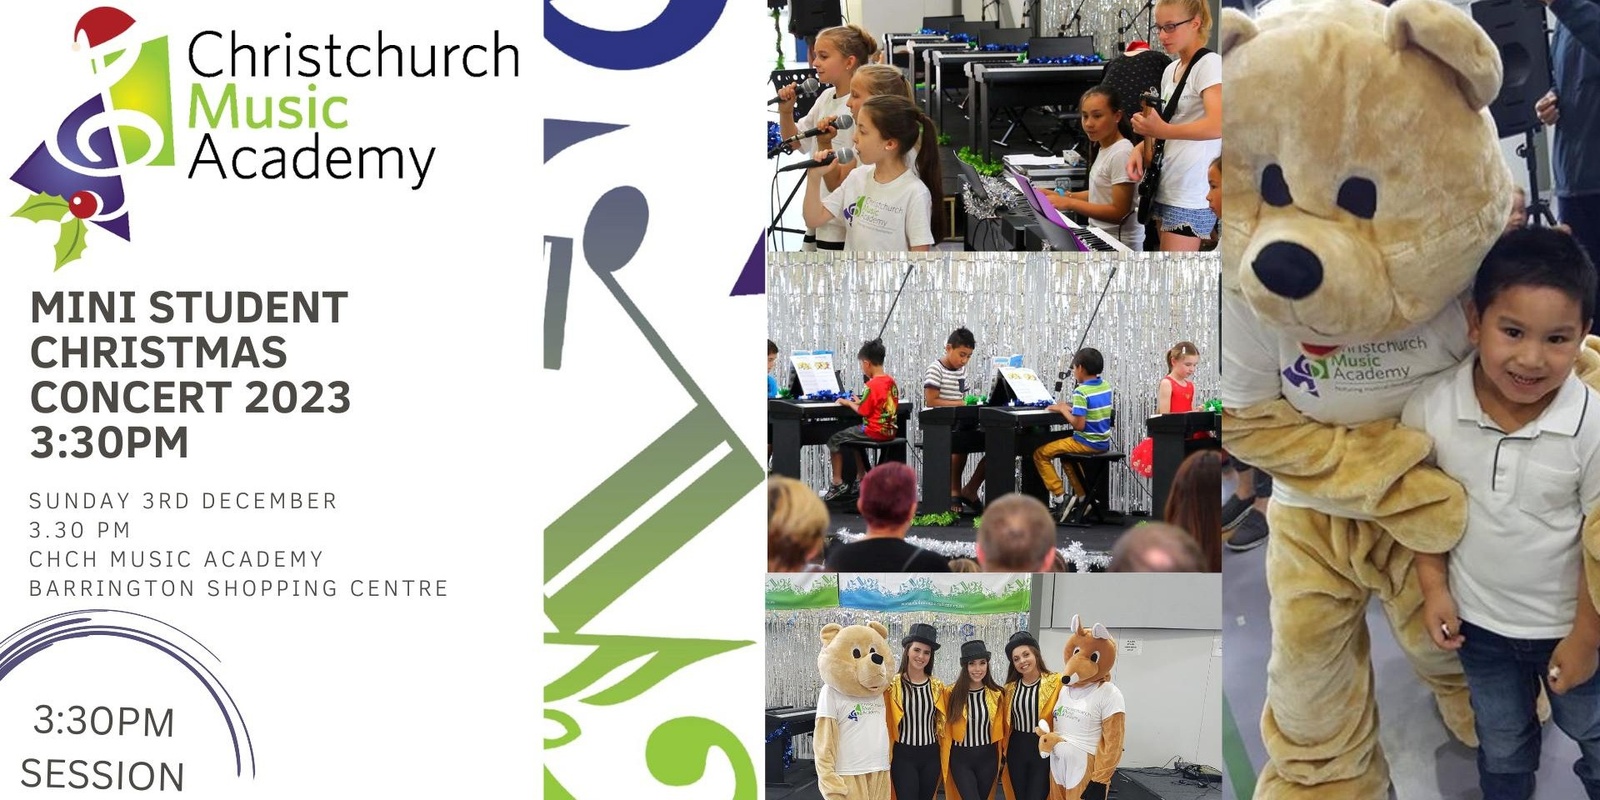 Banner image for Christchurch Music Academy Mini Concert 2023 3:30pm